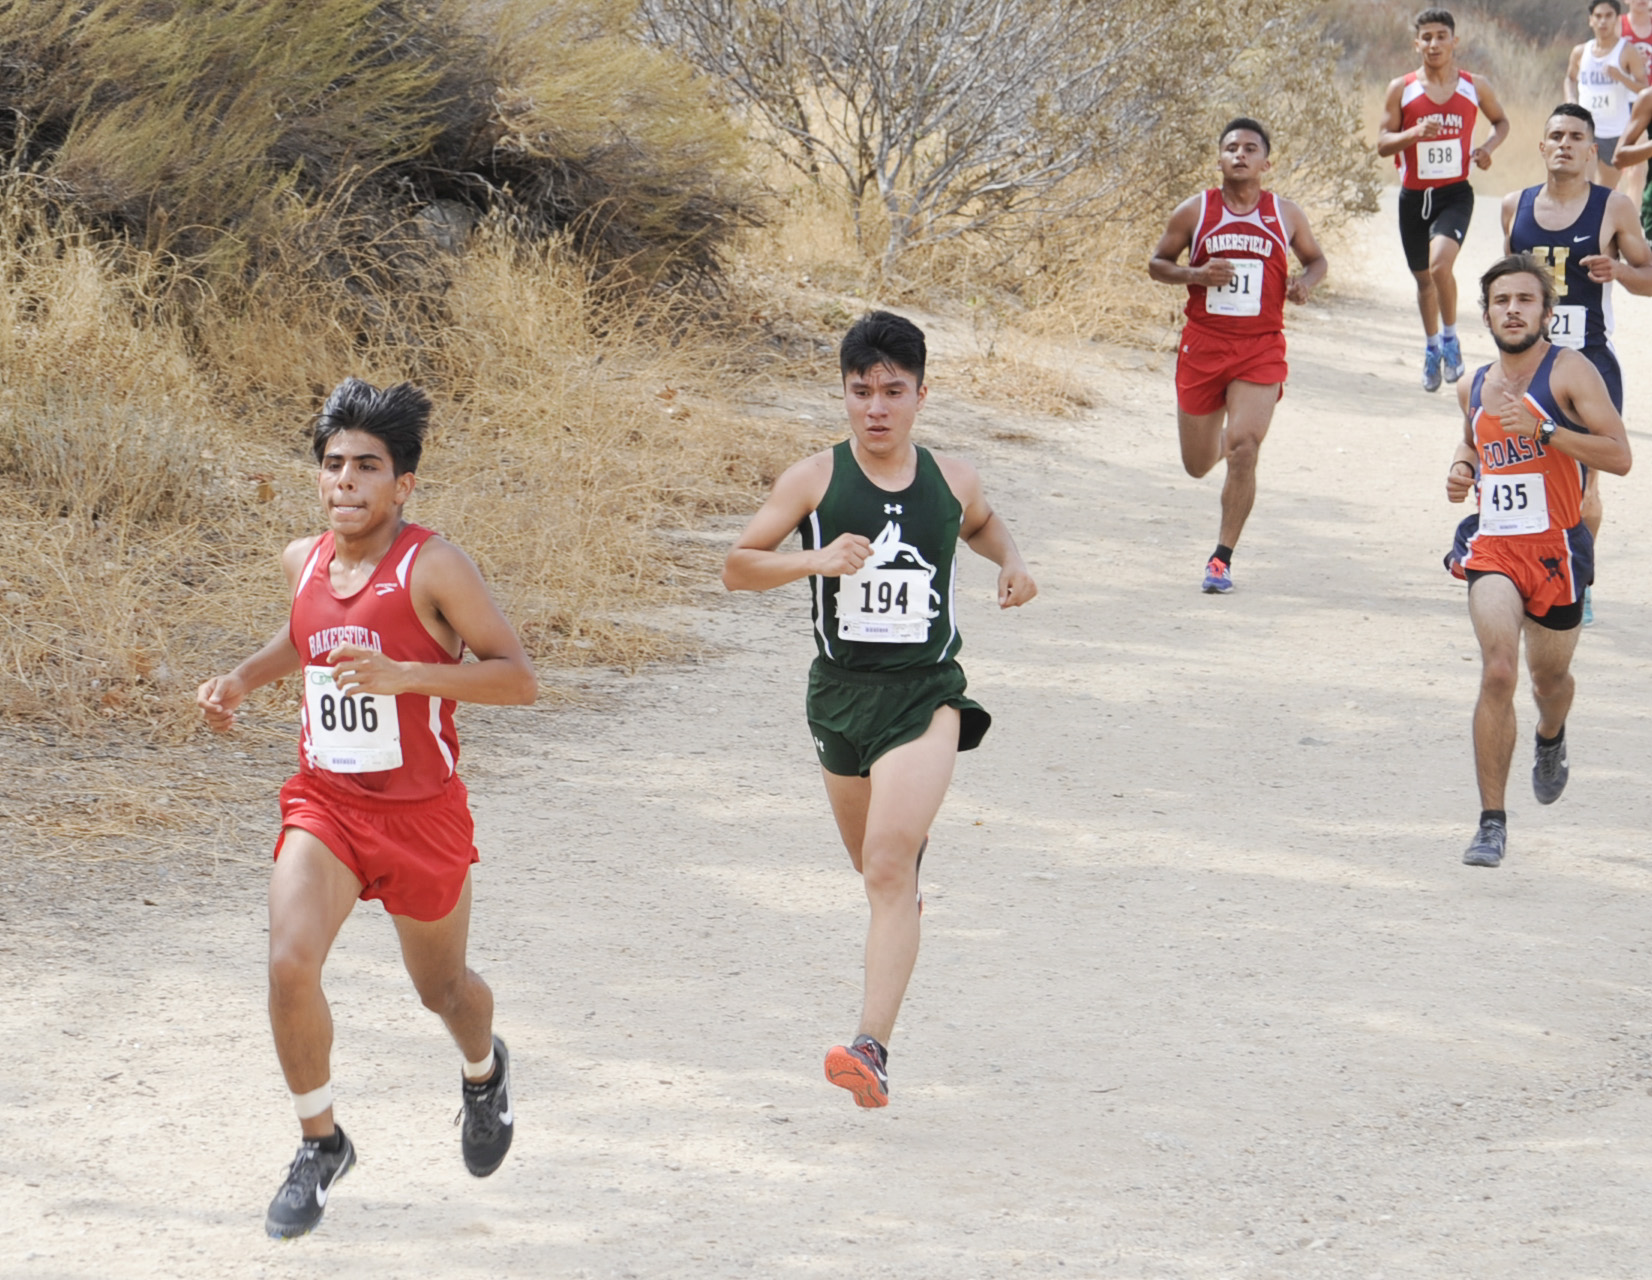 East Los Angeles College freshman Kevin Garcia keeps pace with Bakersfield's Culberto Salgado in the 2017 SoCal Cross Country Championship Preview Meet on Sept. 15. (Photo by Tadzio Garcia)